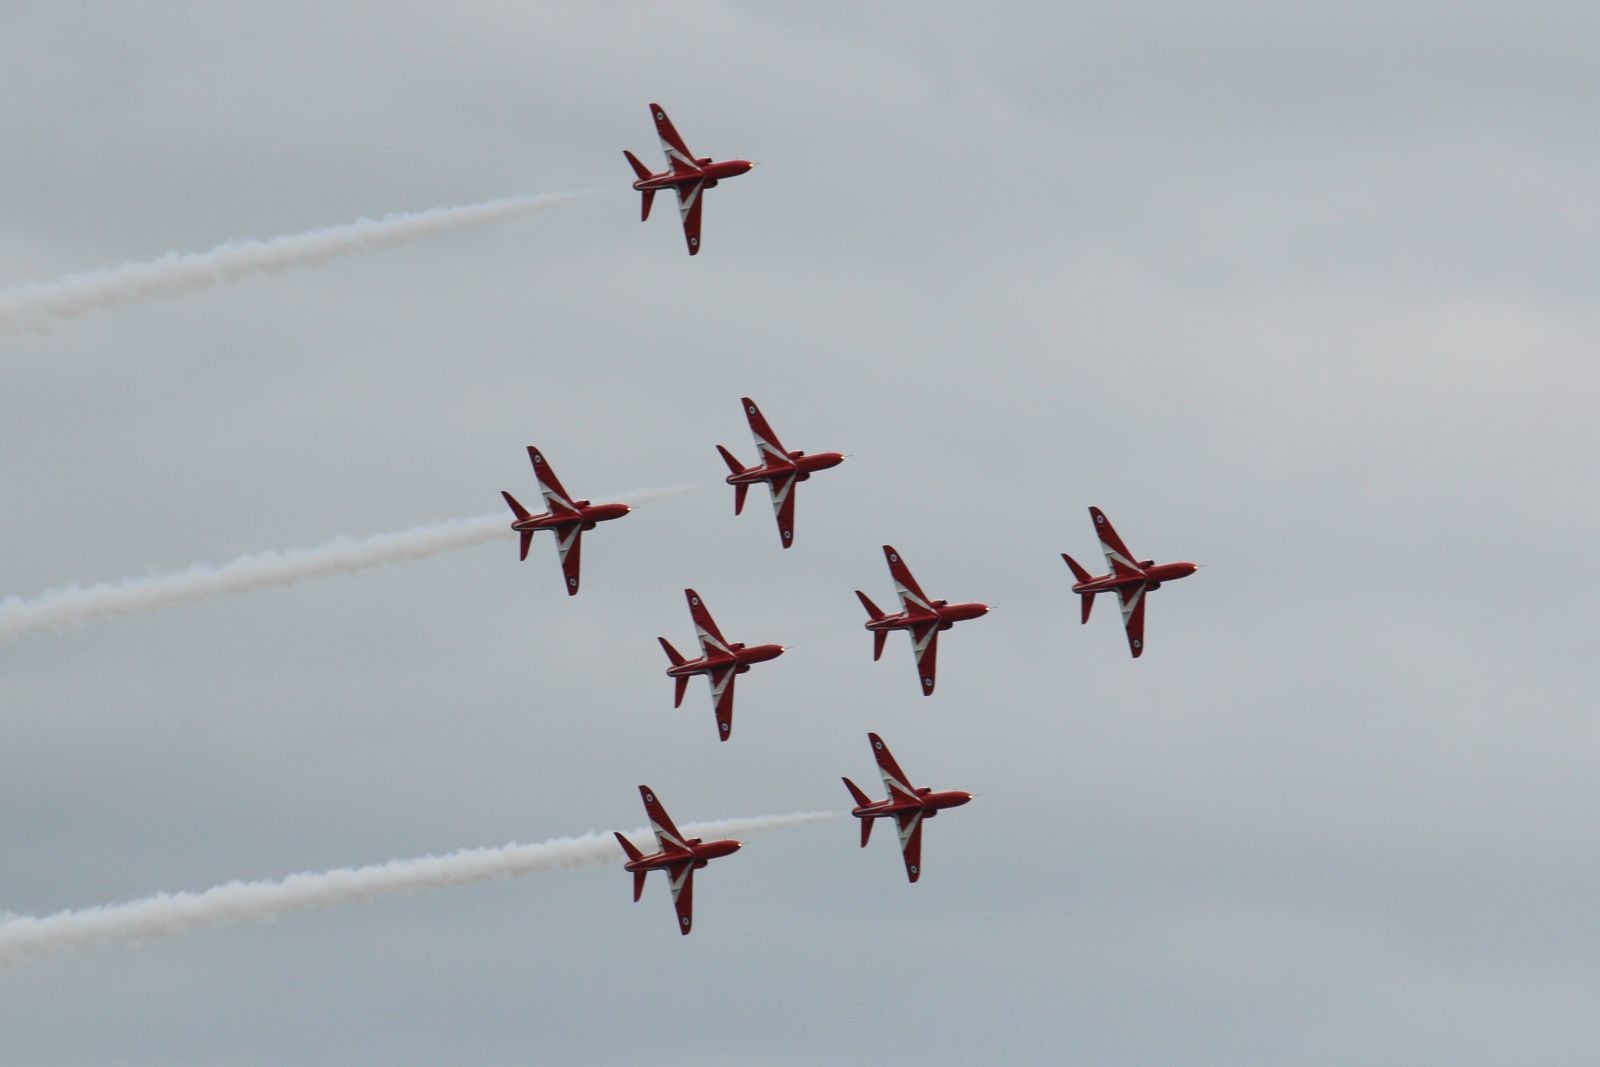 The REd Arrows in formation